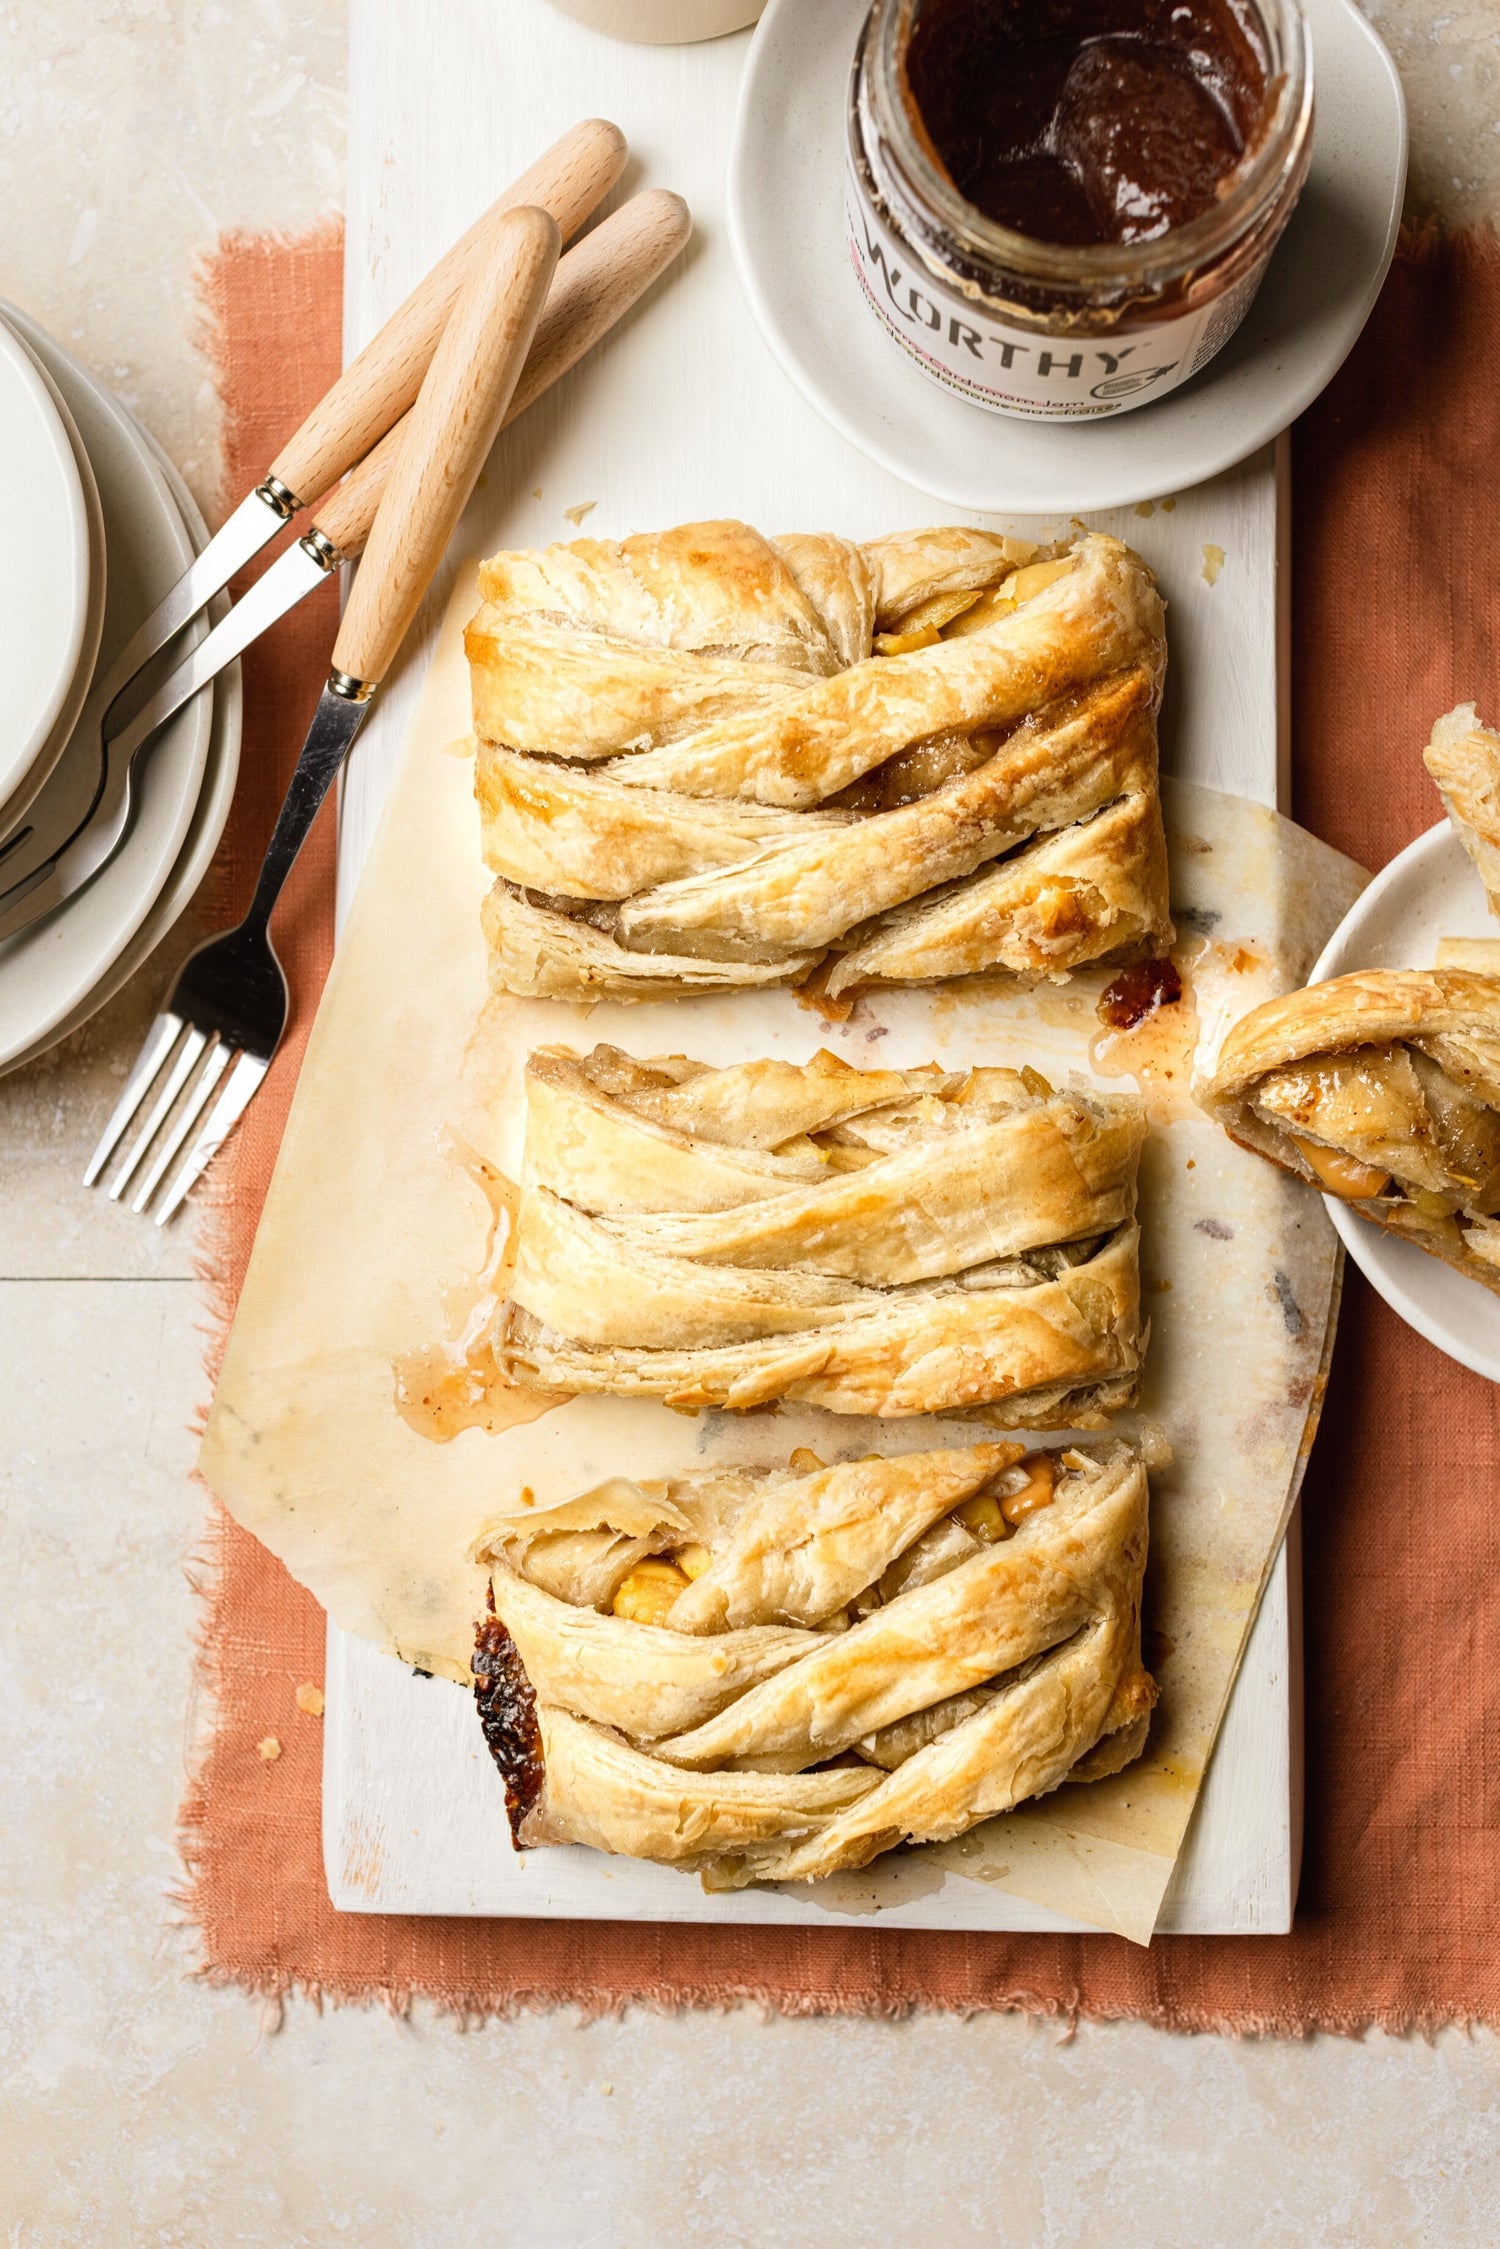 Sliced apple strudel and a strawberry-cardamom filling made with Worthy's Strawberry Cardamom jam.